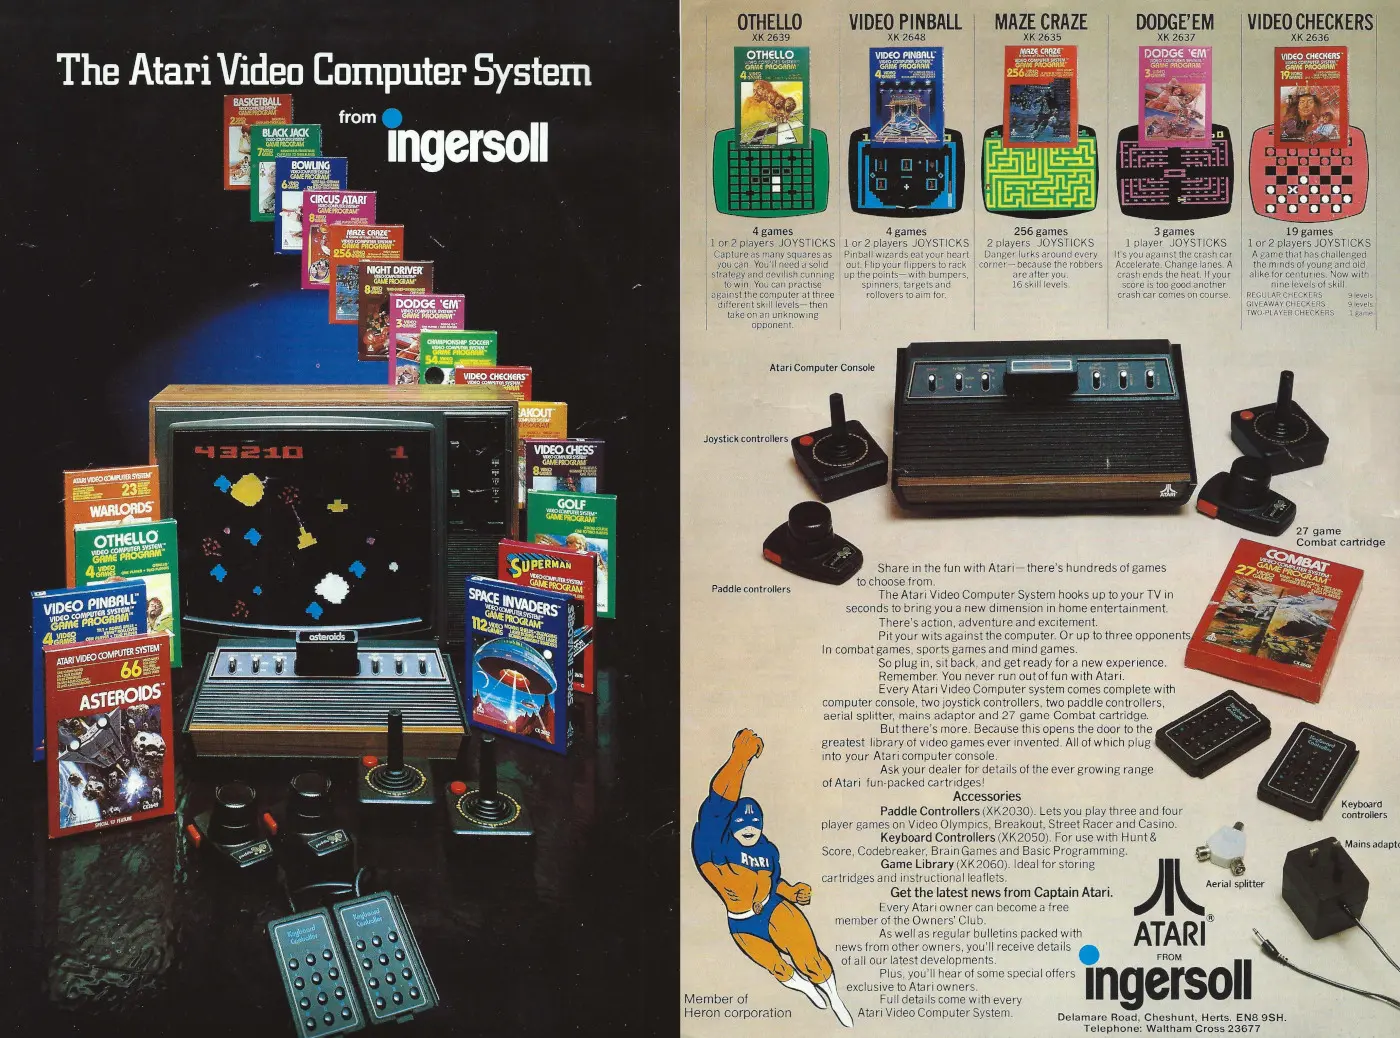 Atari Advert: The <span class='hilite'>Atari Video Computer System</span> from Ingersoll, from Sales Brochure, June 1982